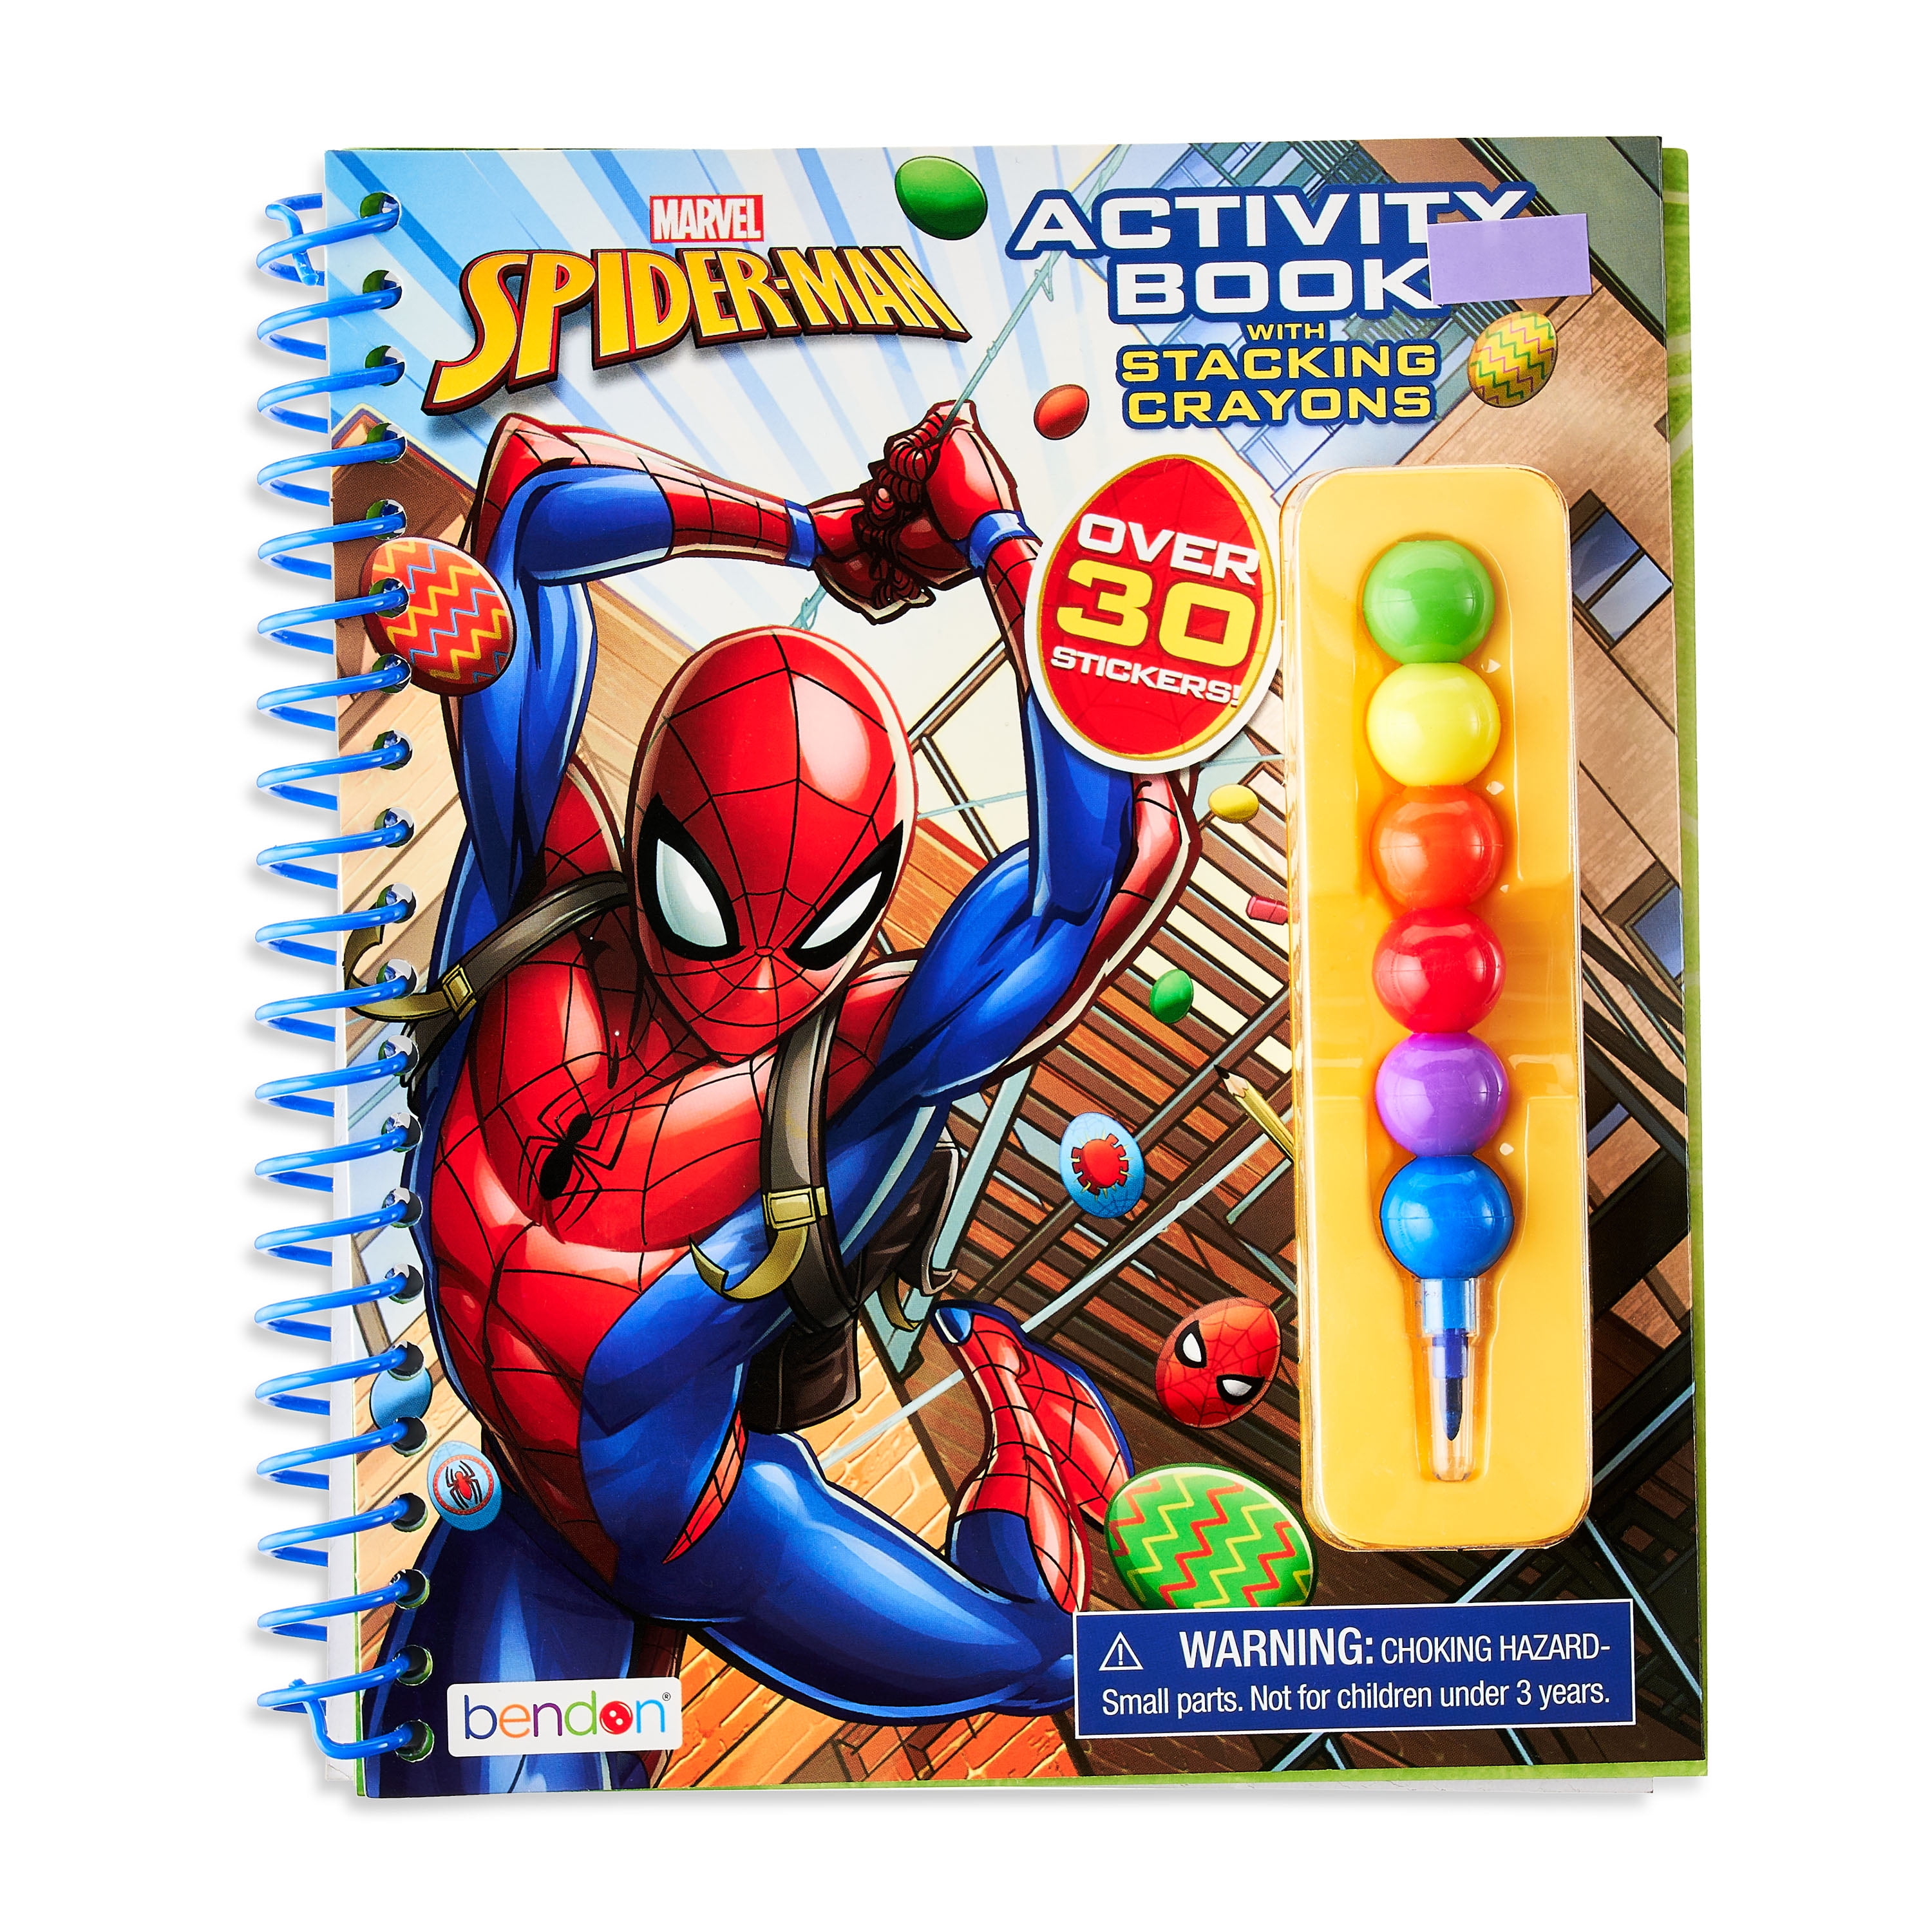 Spider-man Coloring & Activity Book With Jumbo Crayons: Marvel:  9781601390509: : Books